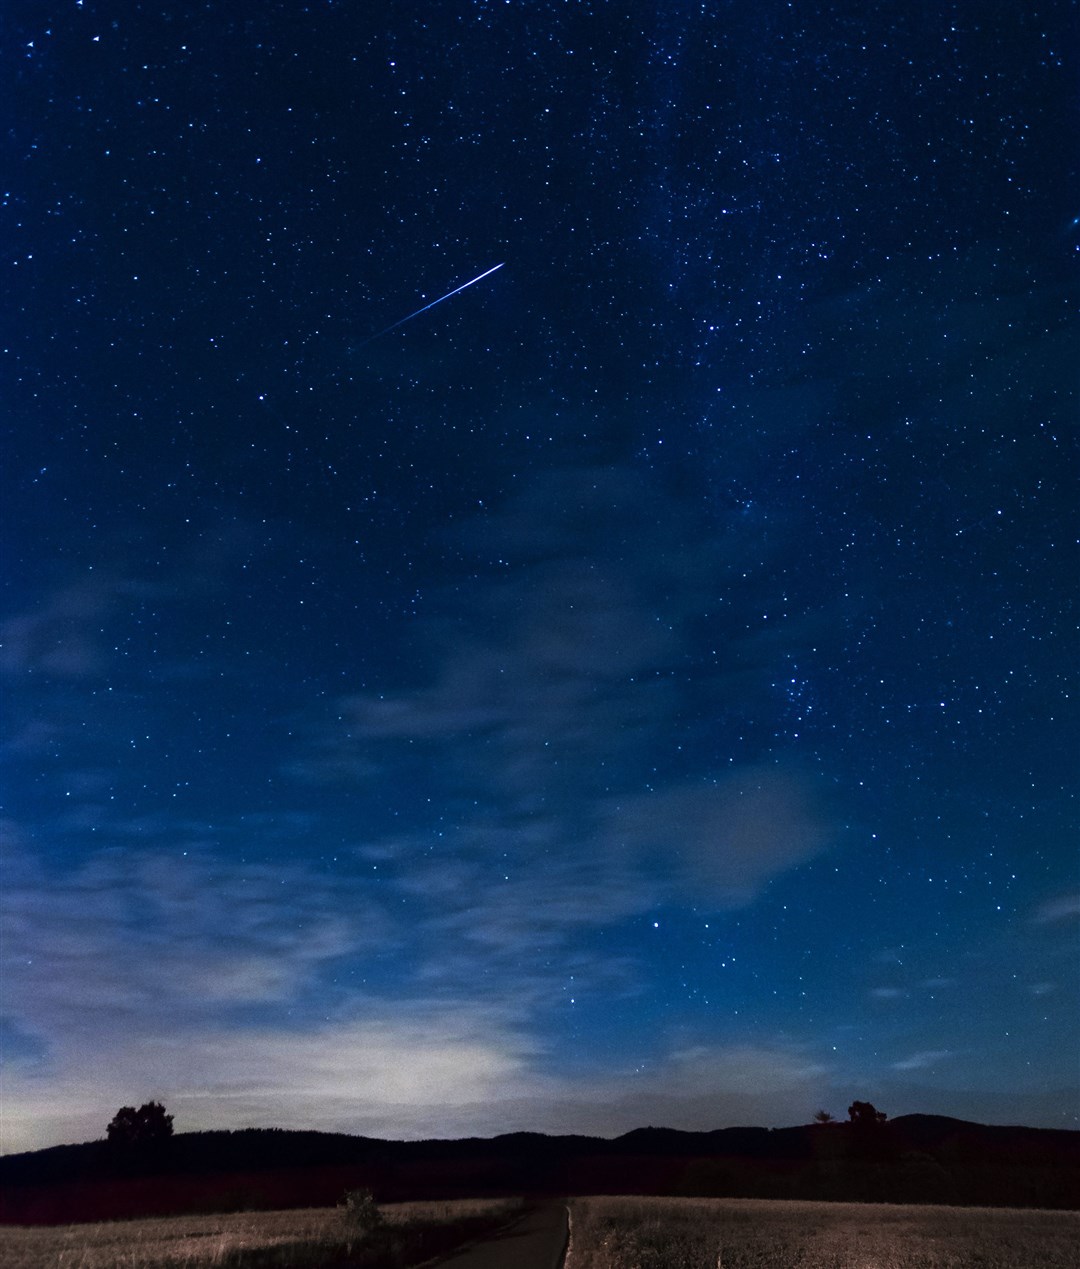 A Perseid meteor. Picture: Jacek Halicki / CC BY-SA (https://creativecommons.org/licenses/by-sa/4.0)